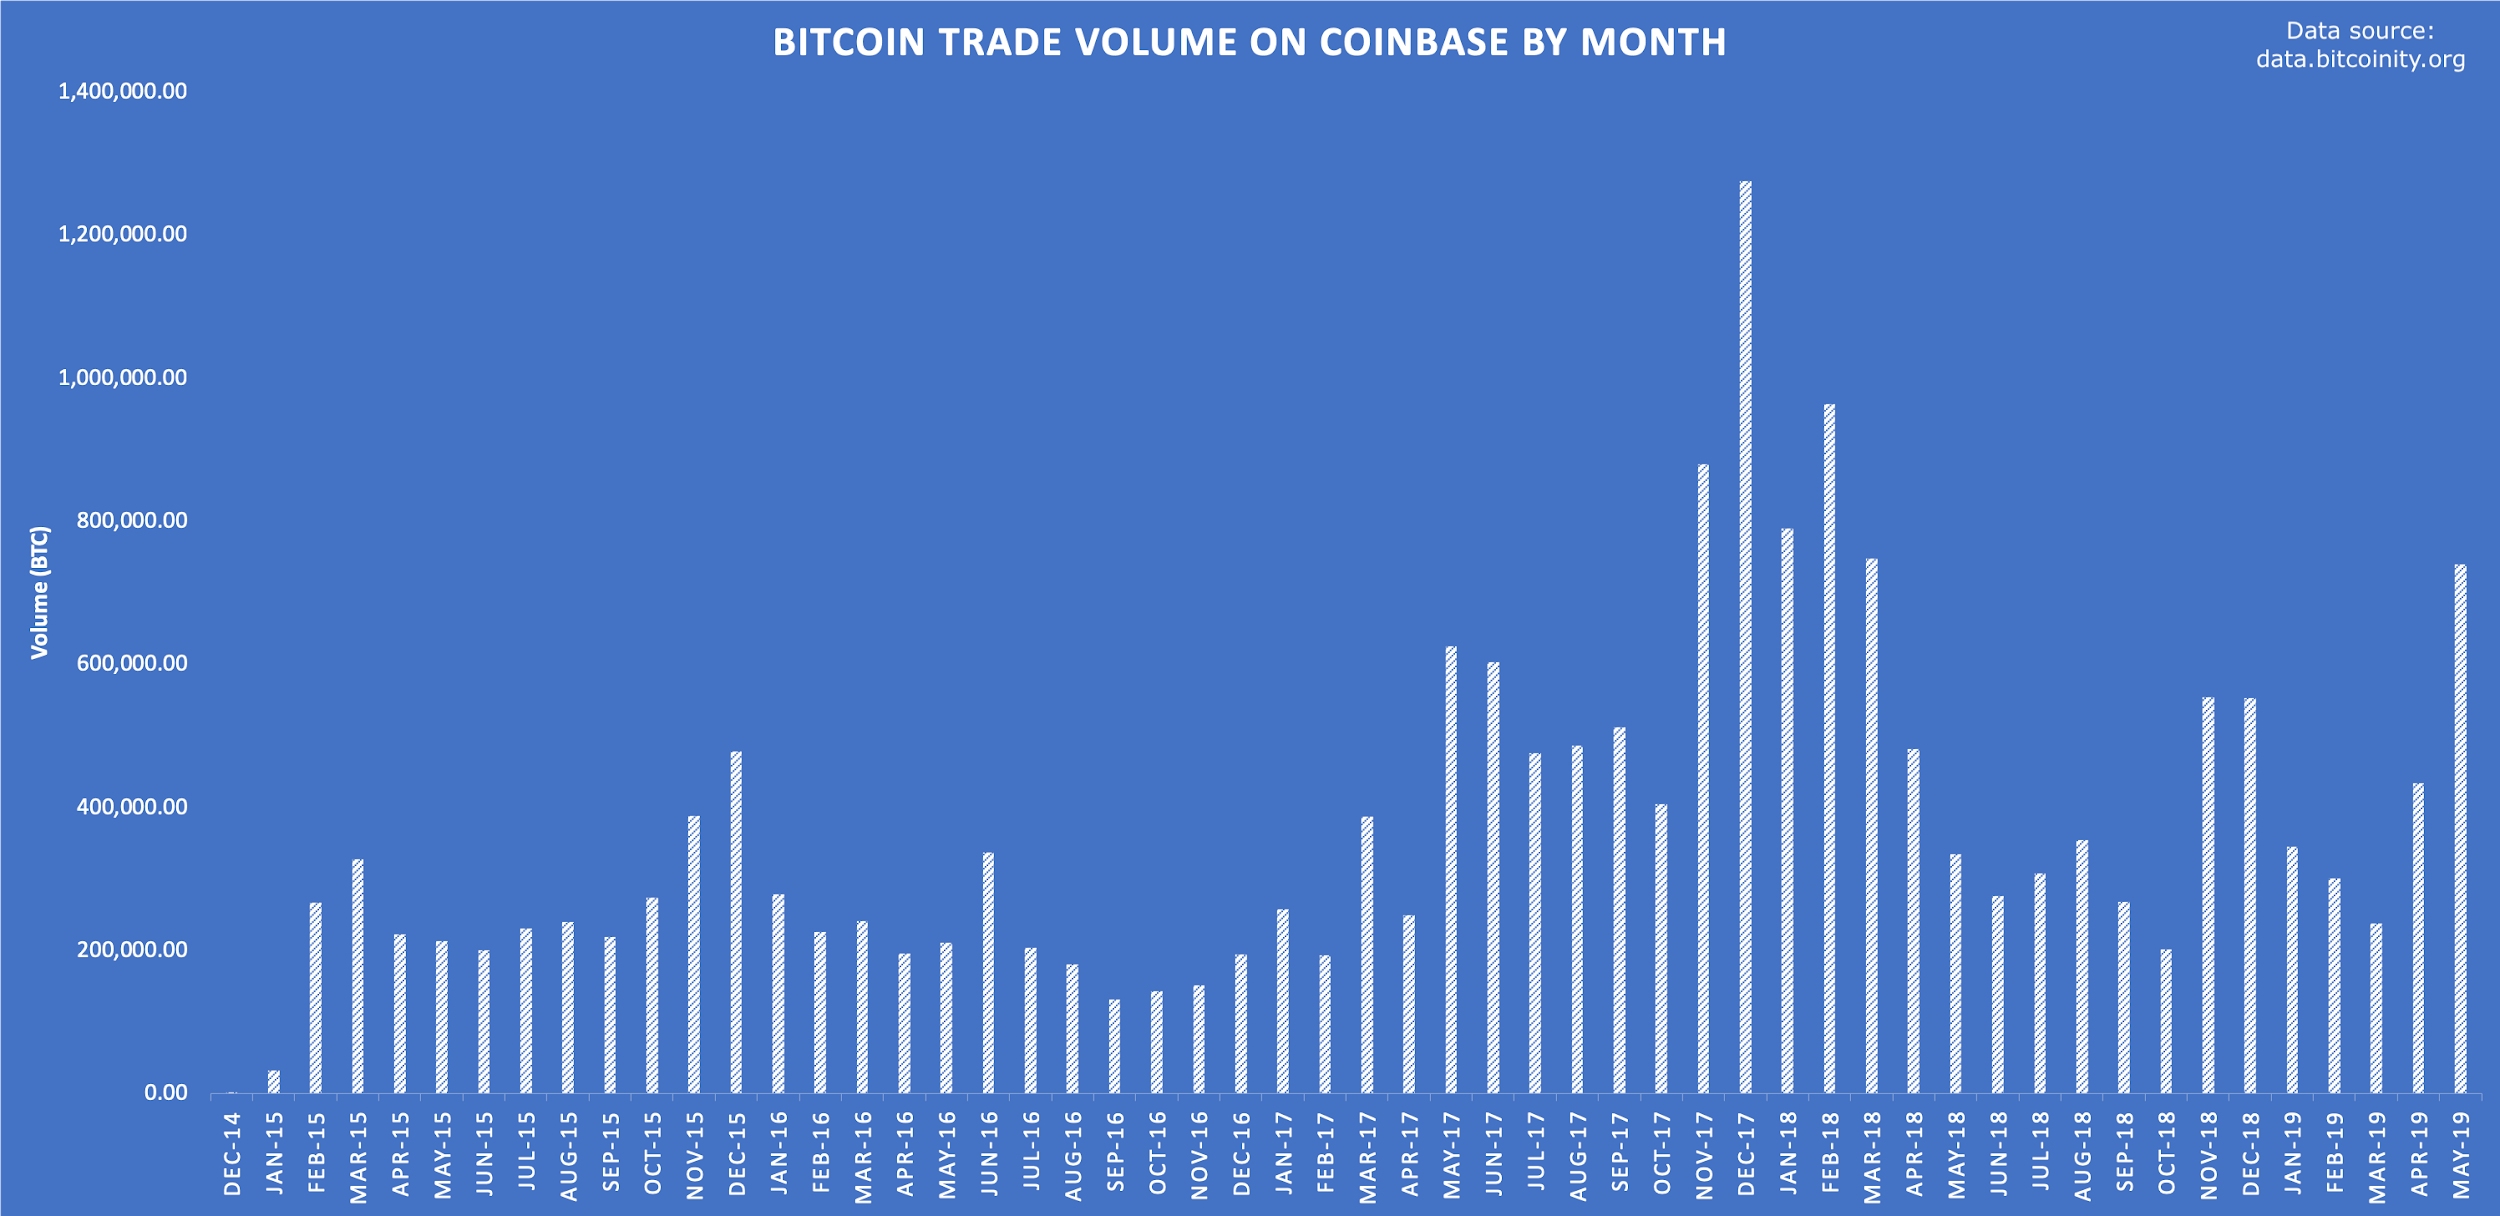 Coinbase: “Bitcoin Trade Volume Sees 14-Month High in May ...